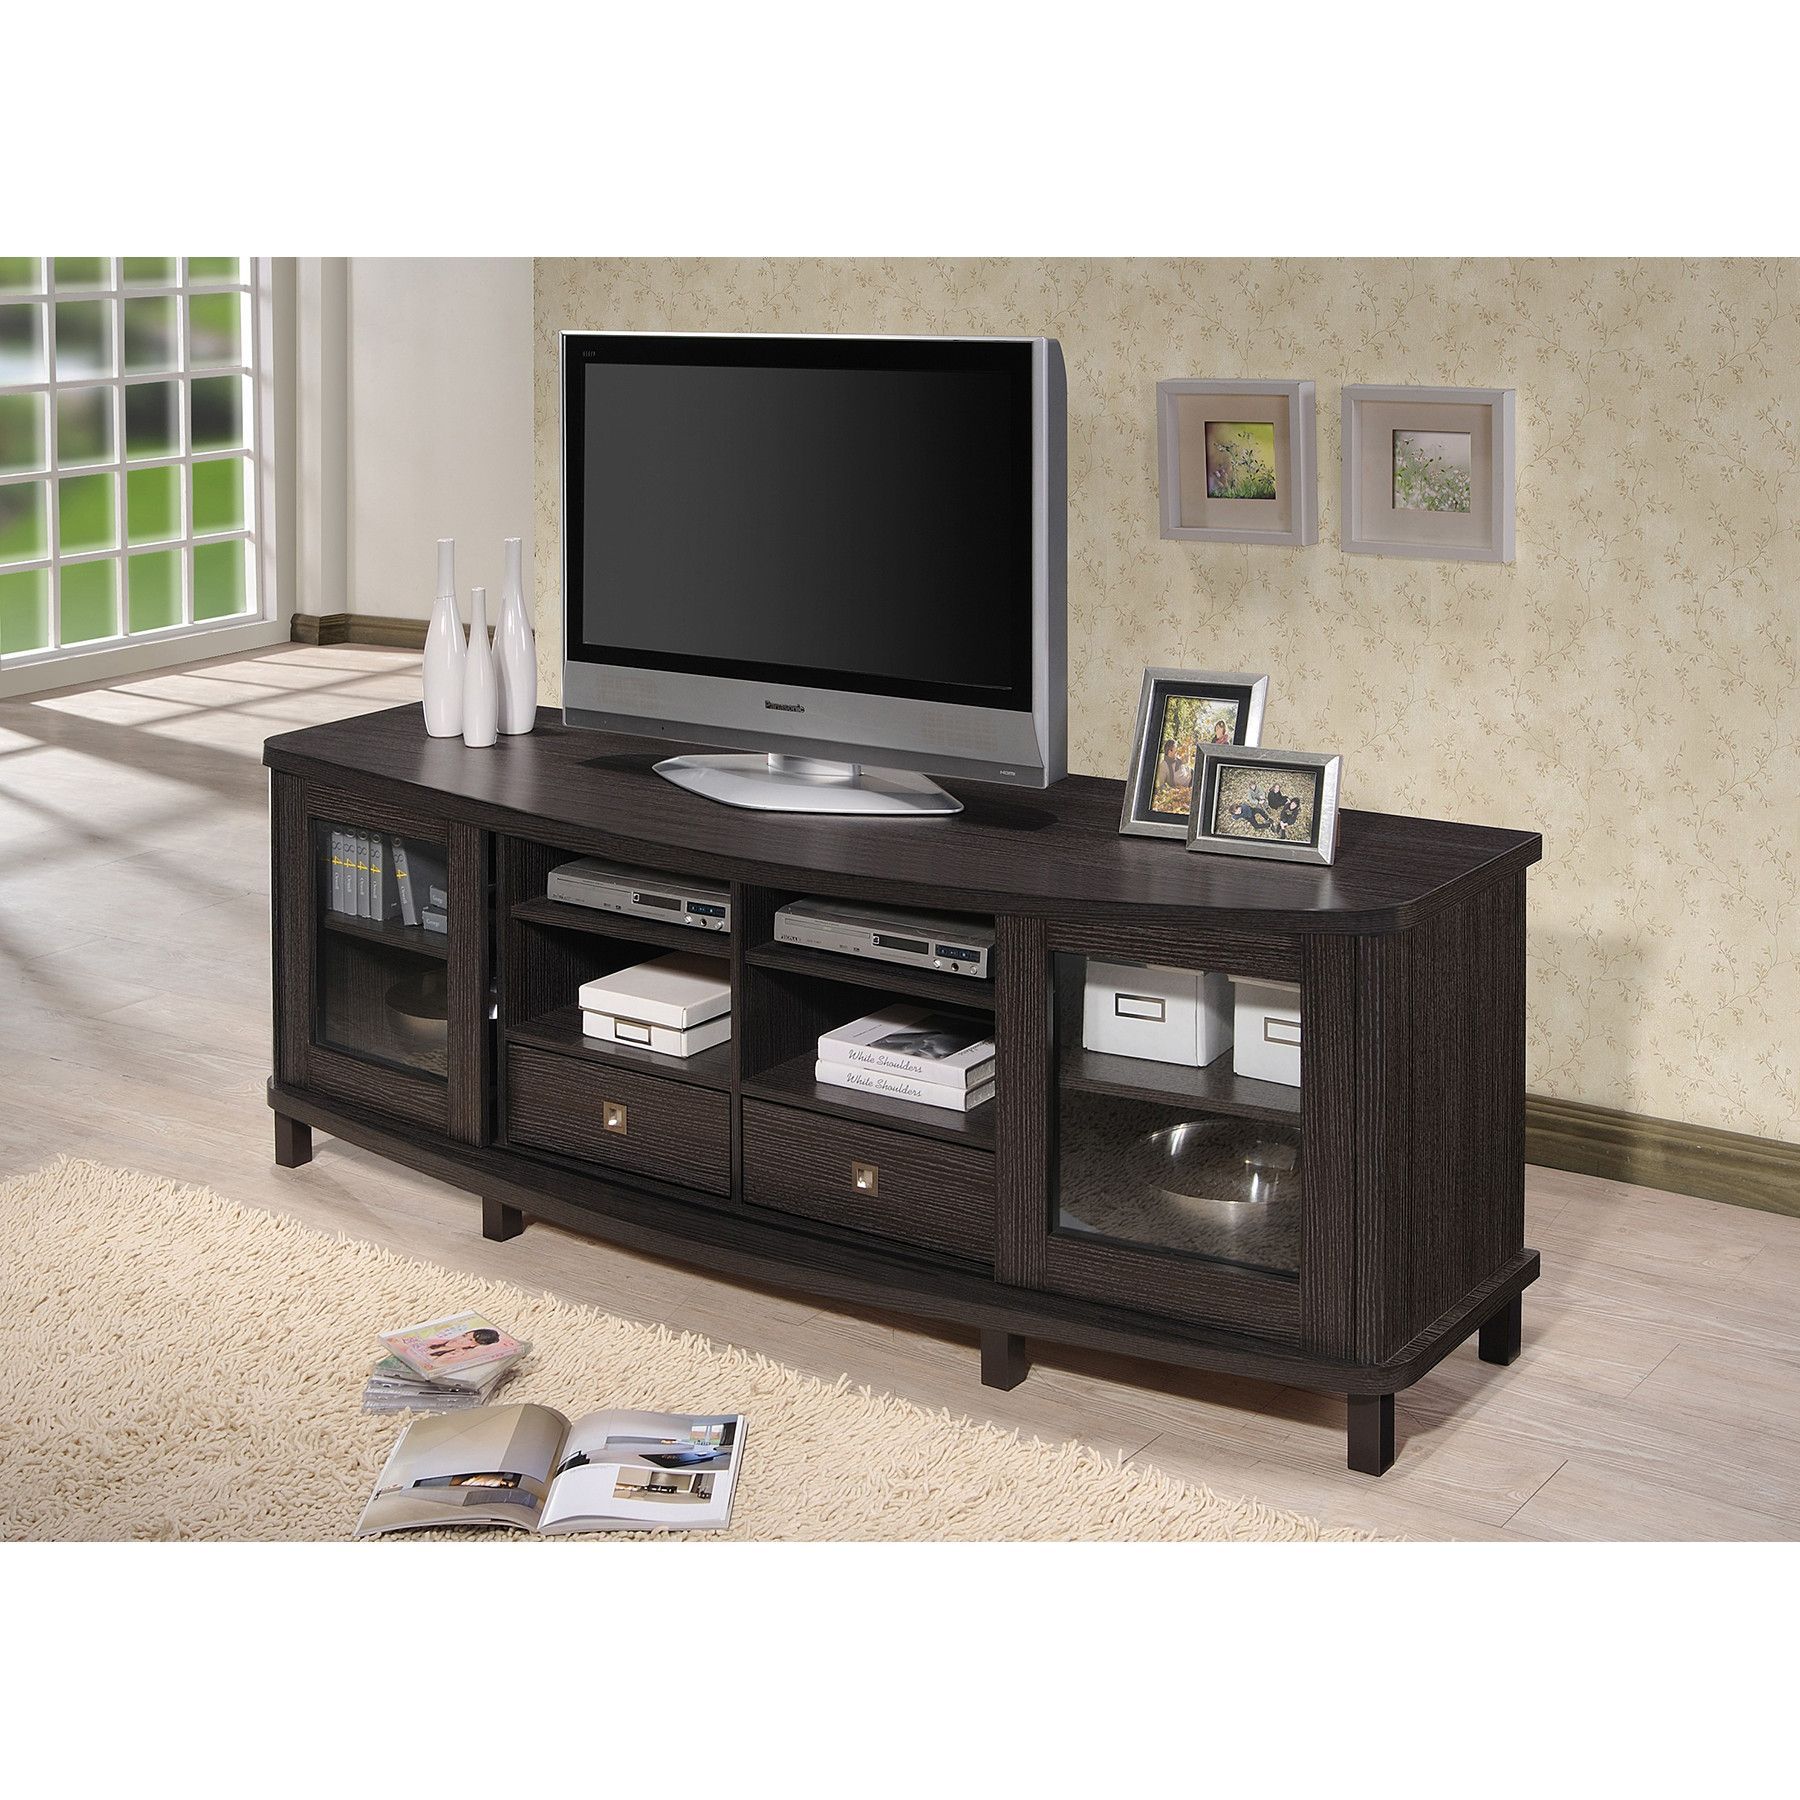 Arana Tv Stand For Tvs Up To 78" In 2020 | Tv Cabinets Within Dark Wood Tv Stands (View 5 of 15)